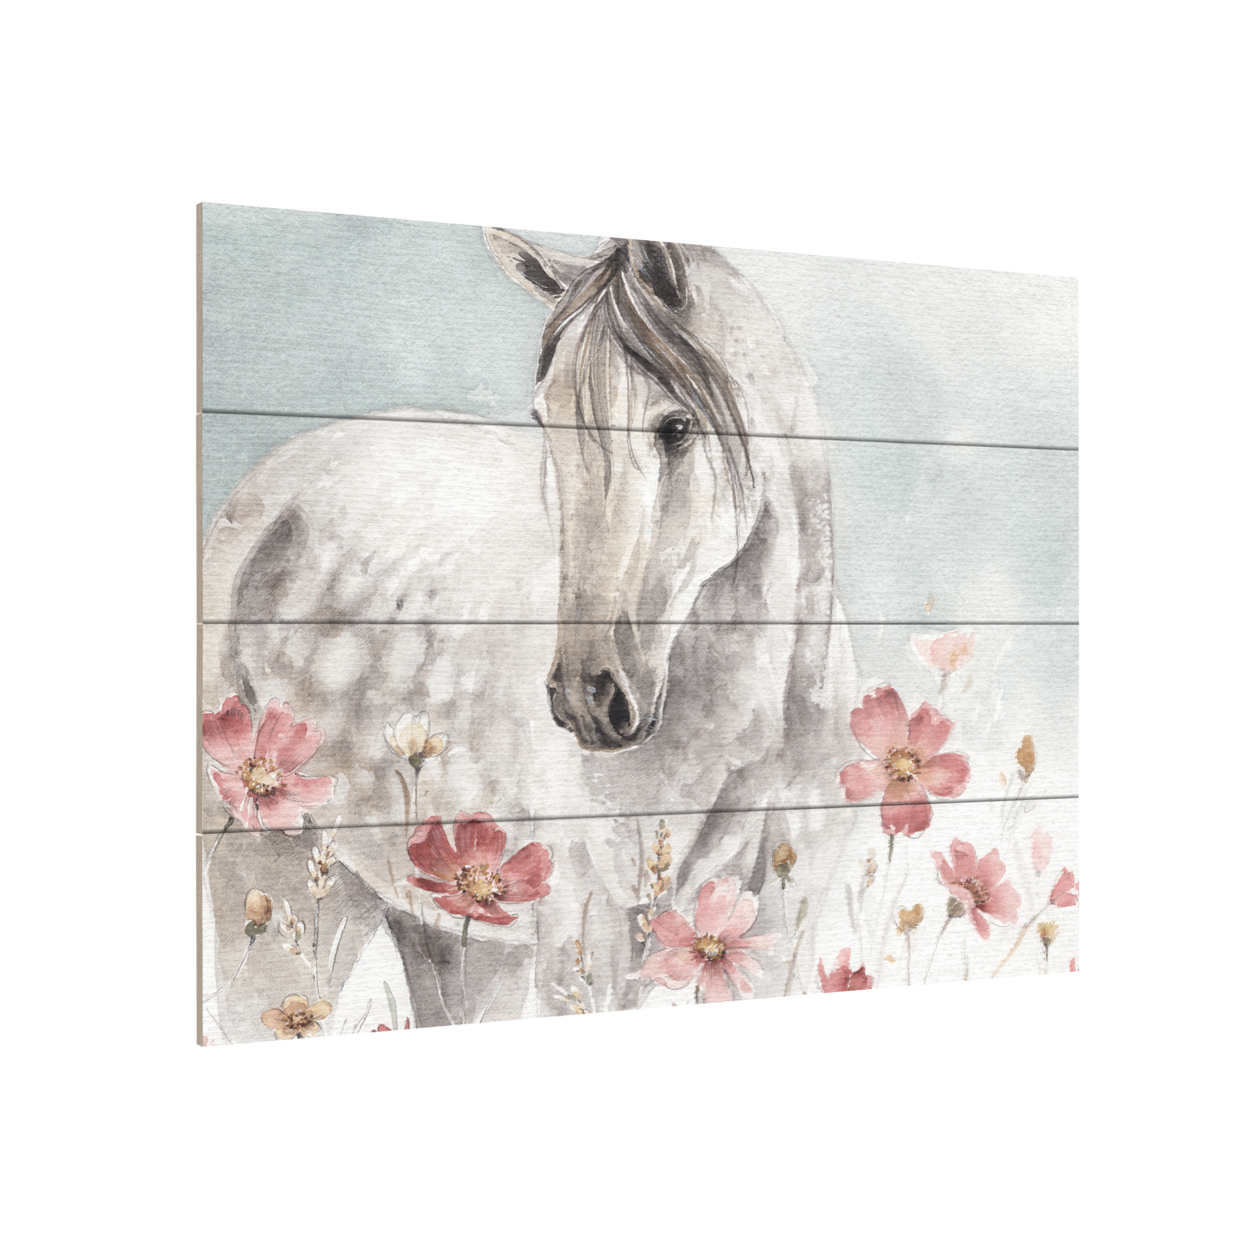 Wall Art 12 X 16 Inches Titled Wild Horses I Ready To Hang Printed On Wooden Planks